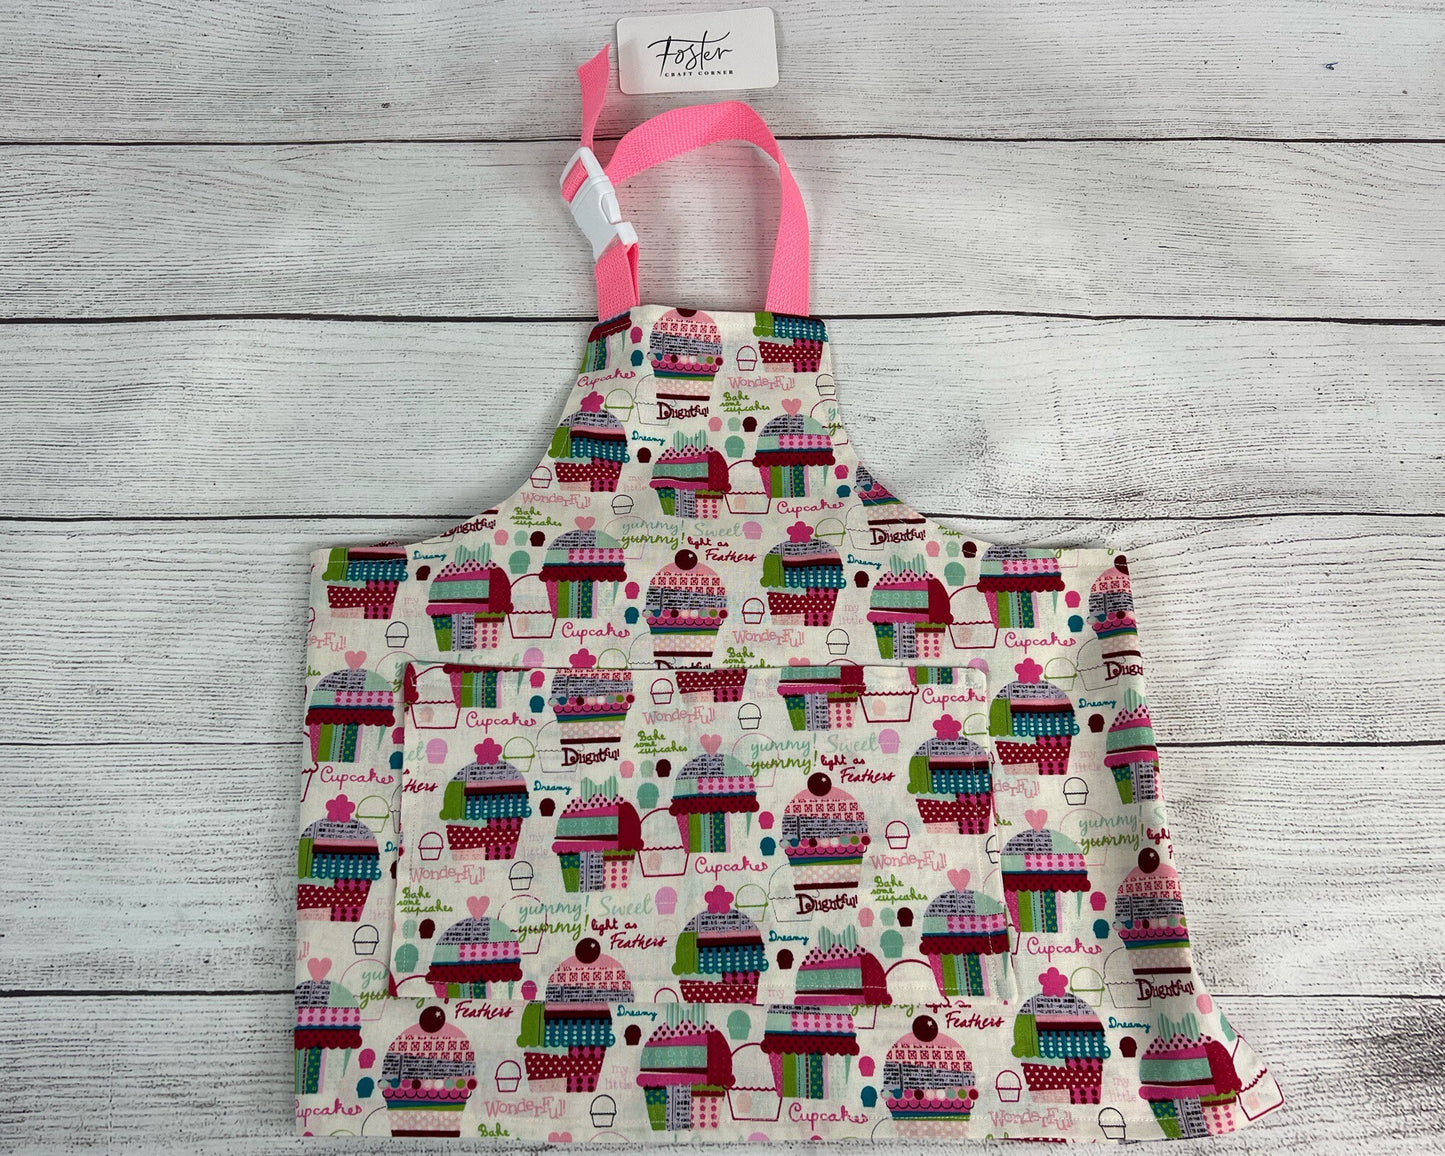 Toddler Apron - Kitchen - Cooking - Early Cooking Skills - Toddler Messes - Toddler Accessories - Cupcakes - Treats - Baking - Small Apron